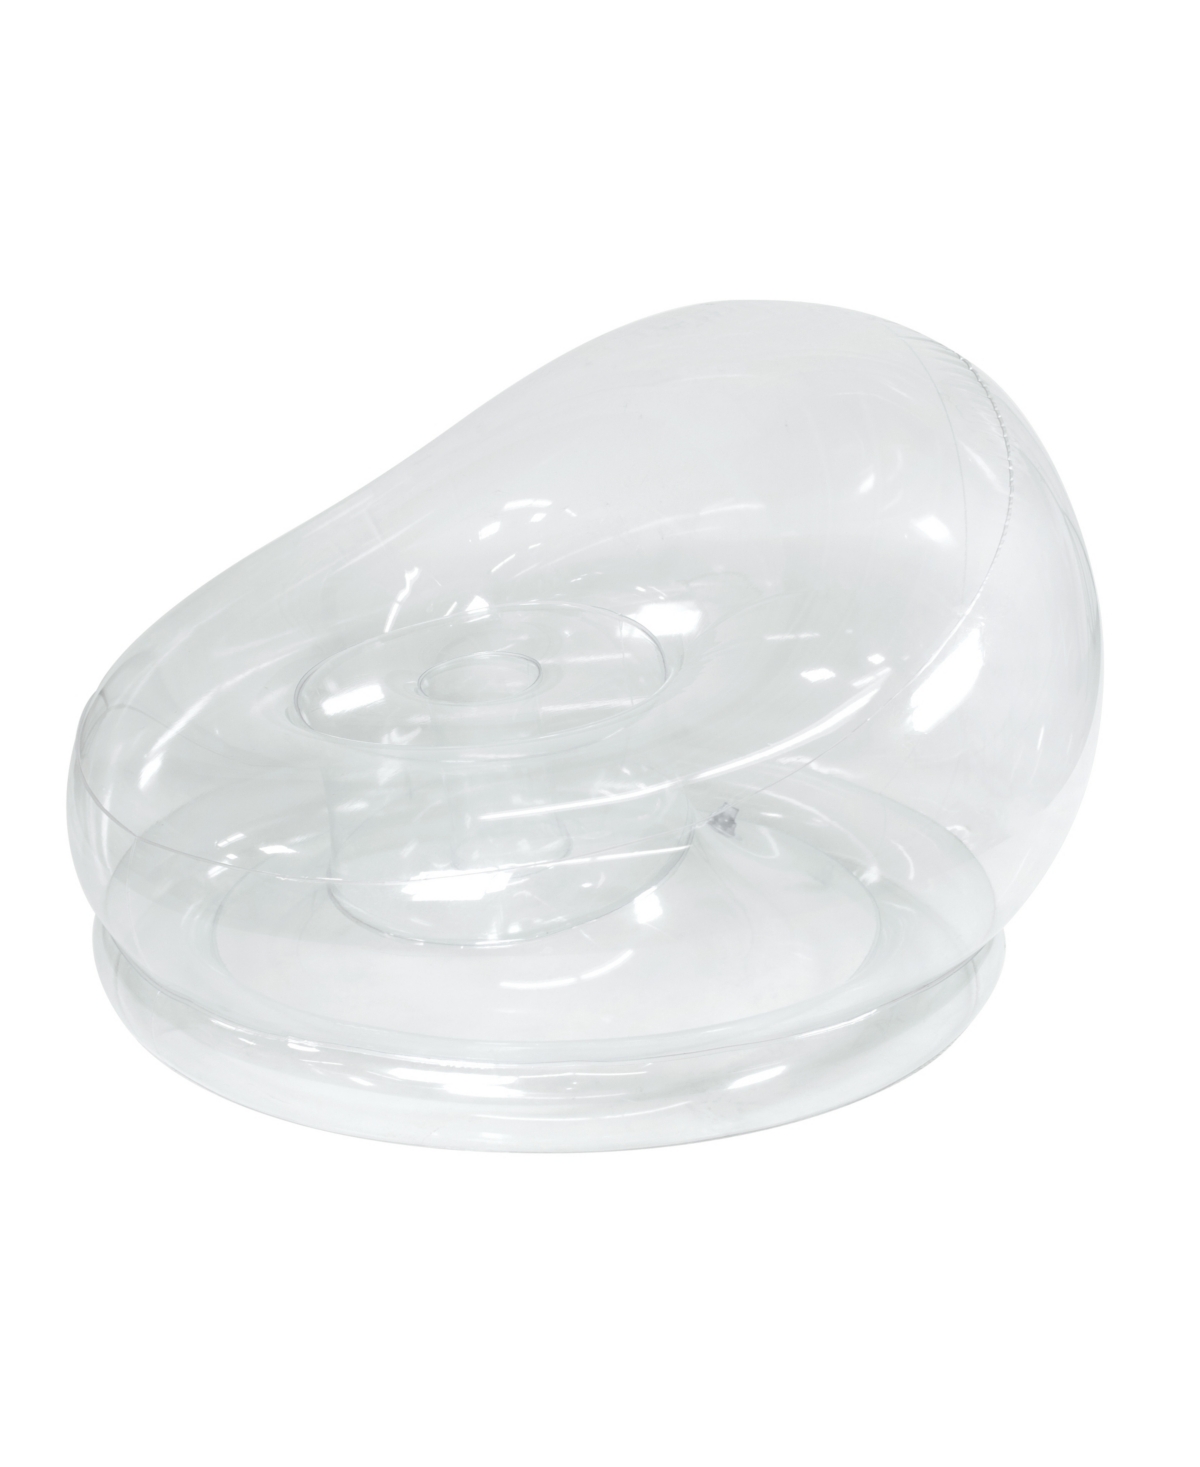 PoolCandy's AirCandy Inflatable Clear Chair